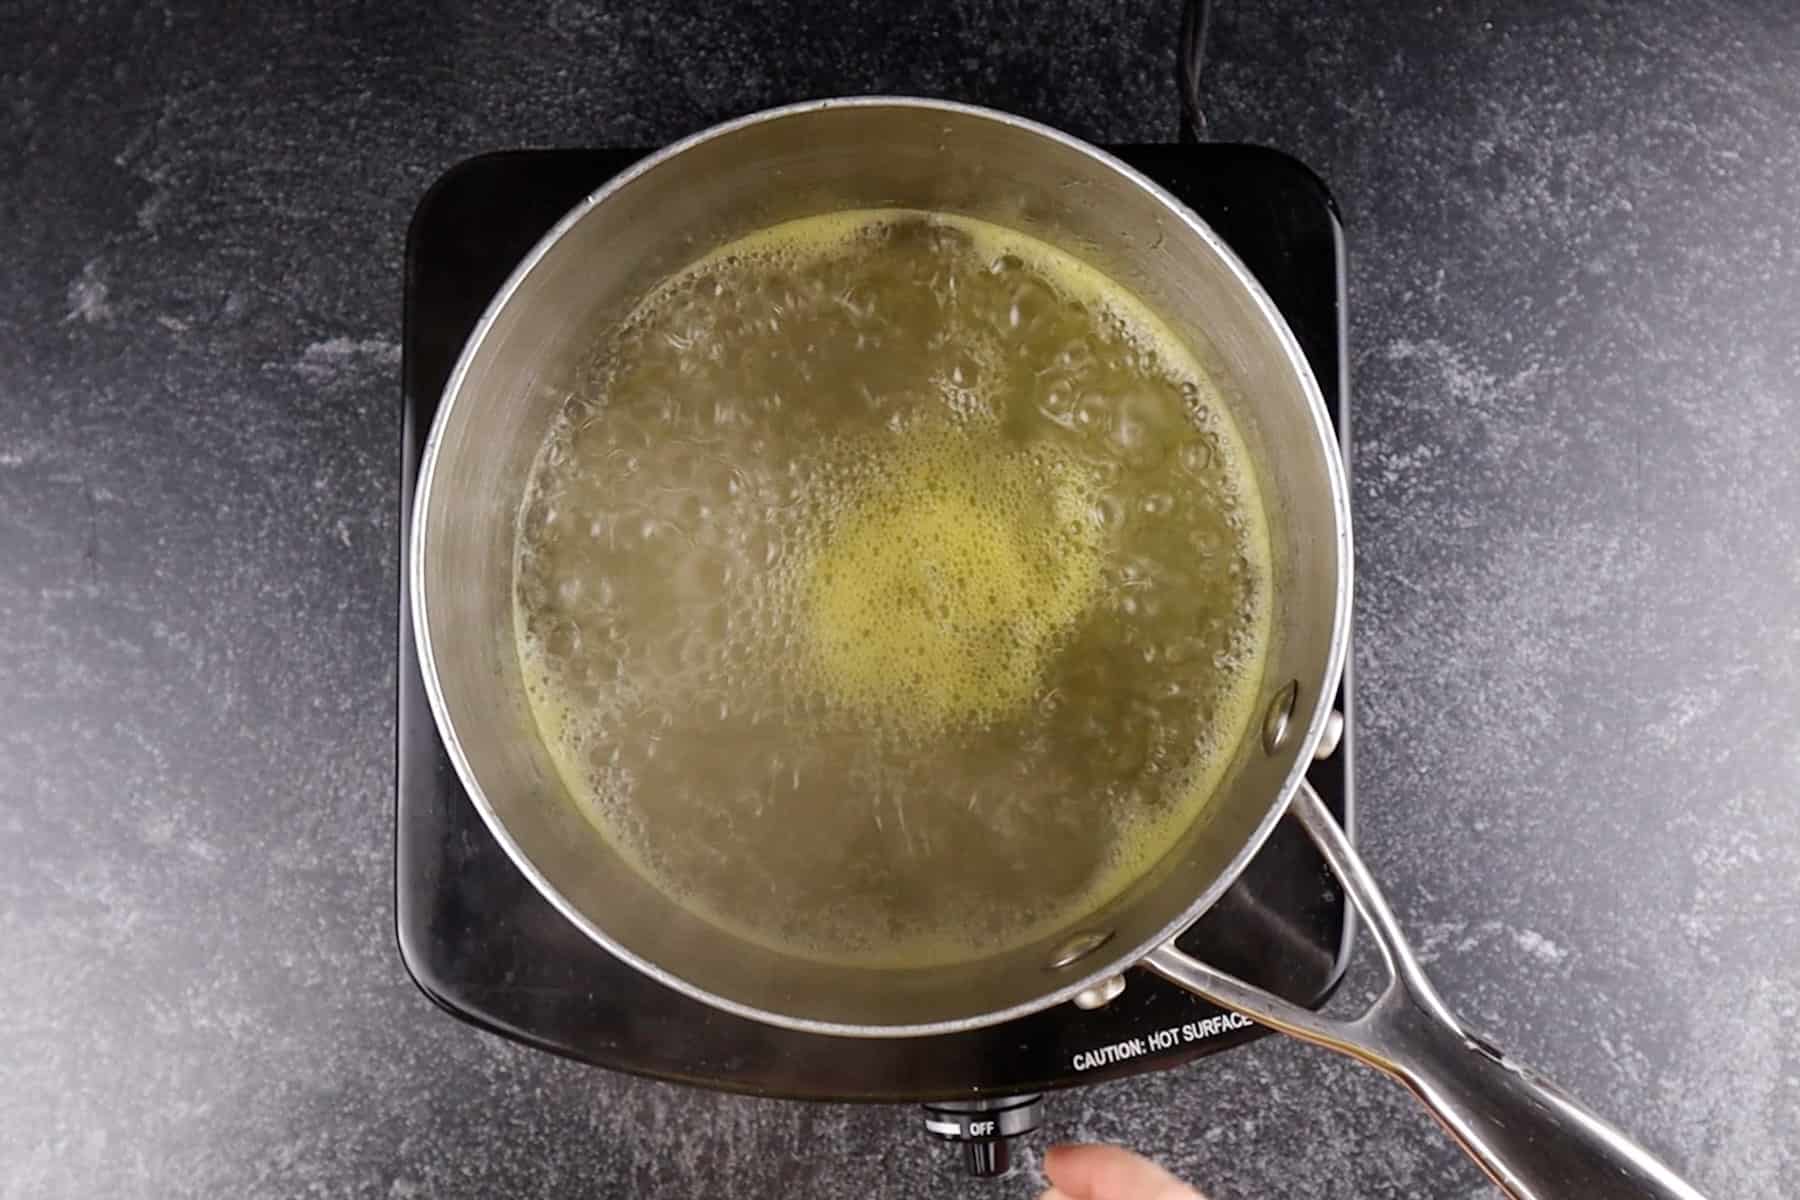 boiling the sugar, water, and orange juice